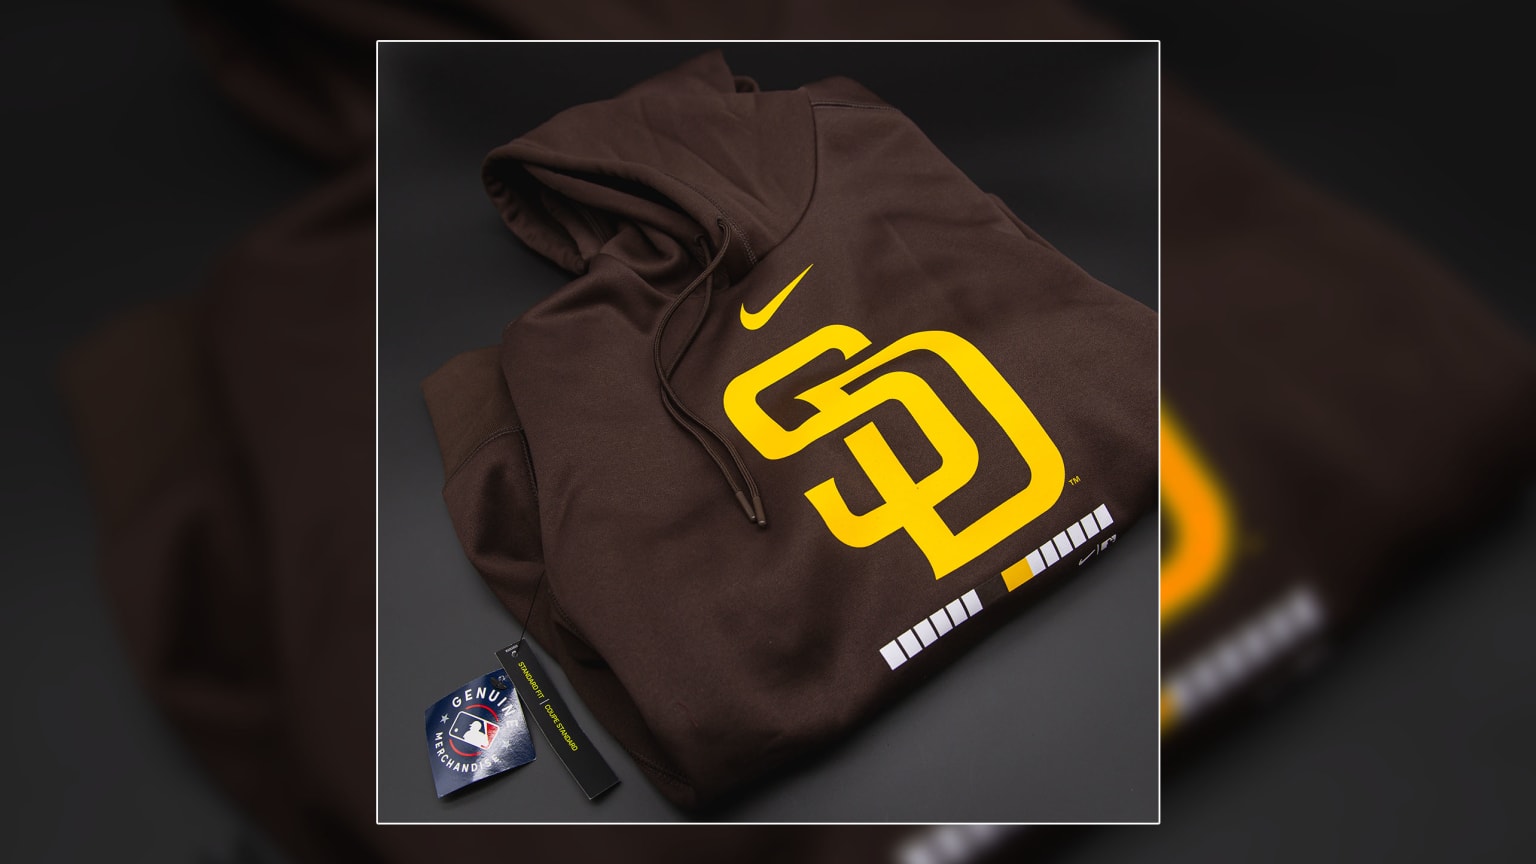 padres official store